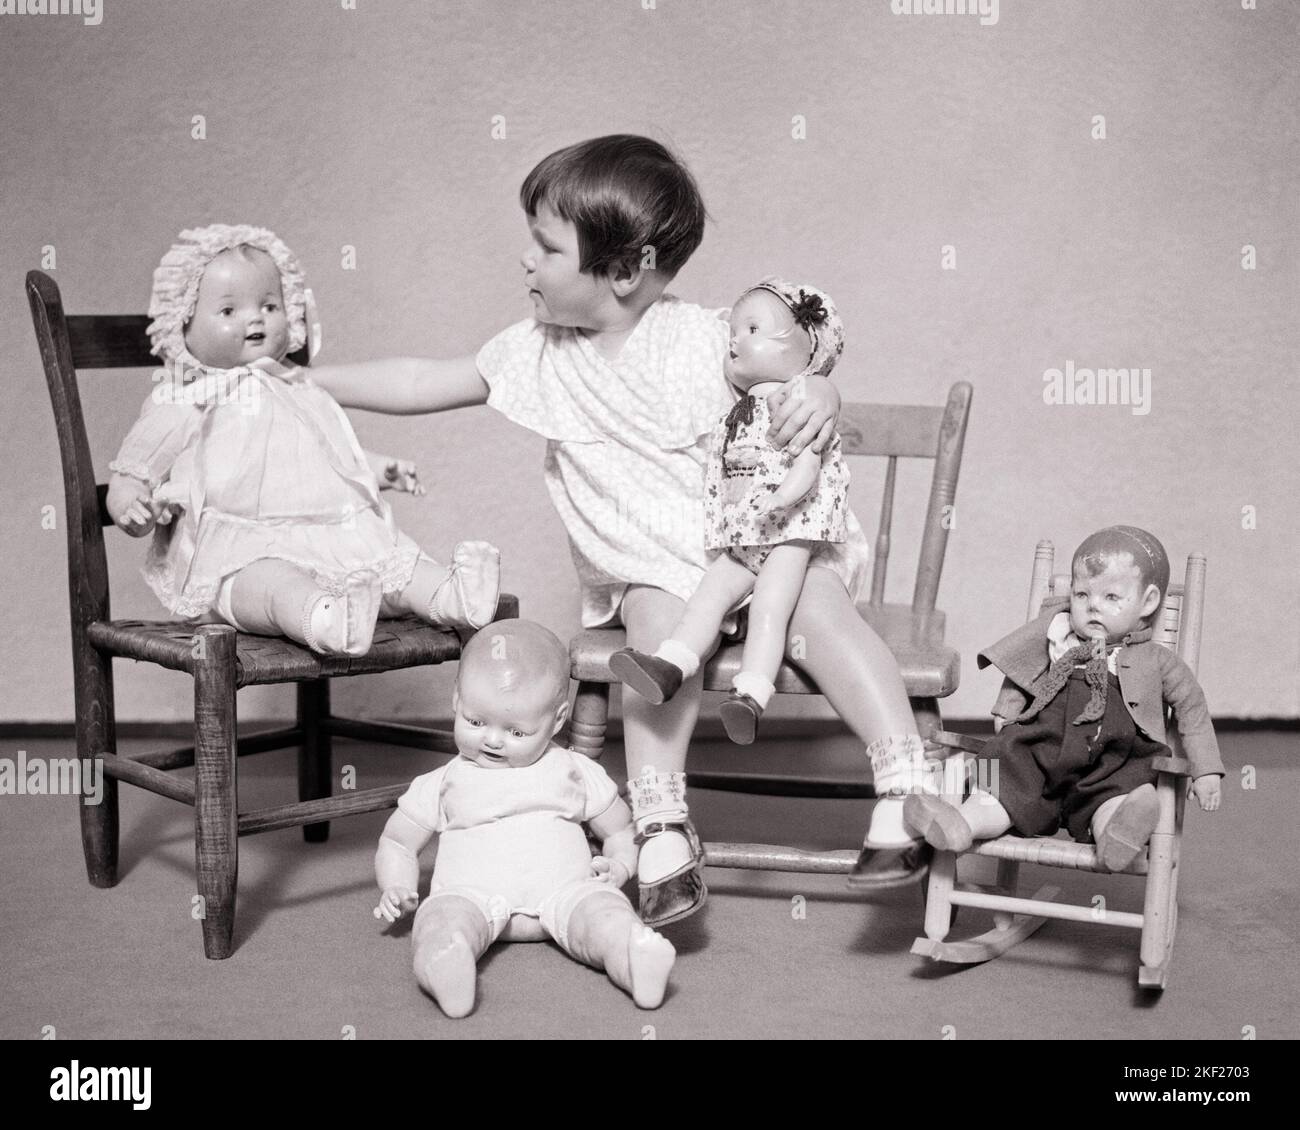 1930s LITTLE BRUNETTE GIRL PLAYING WITH DOLLS GETTING HER VARIOUS DOLLS SEATED IN CHAIRS ON HER LAP OR ON FLOOR BY HER FEET - j4616 HAR001 HARS B&W LAP BRUNETTE GOALS PORCELAIN MODELS CONNECTION STYLISH VARIOUS OR COLLECTIBLES GROWTH JUVENILES TOGETHERNESS BLACK AND WHITE CAUCASIAN ETHNICITY COLLECTIBLE HAR001 OLD FASHIONED Stock Photo